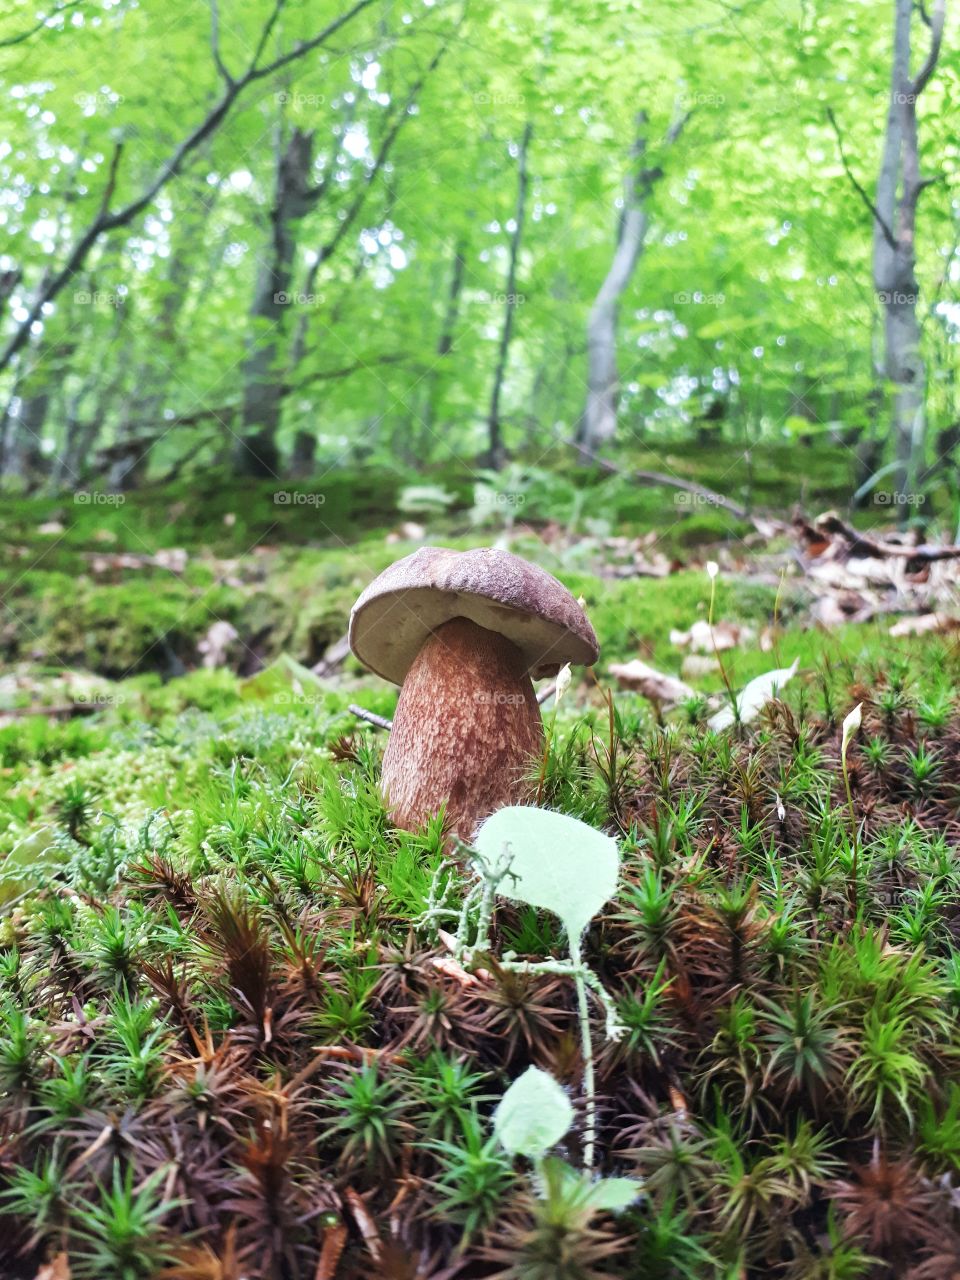 One of the most beautiful Boletus I've ever had